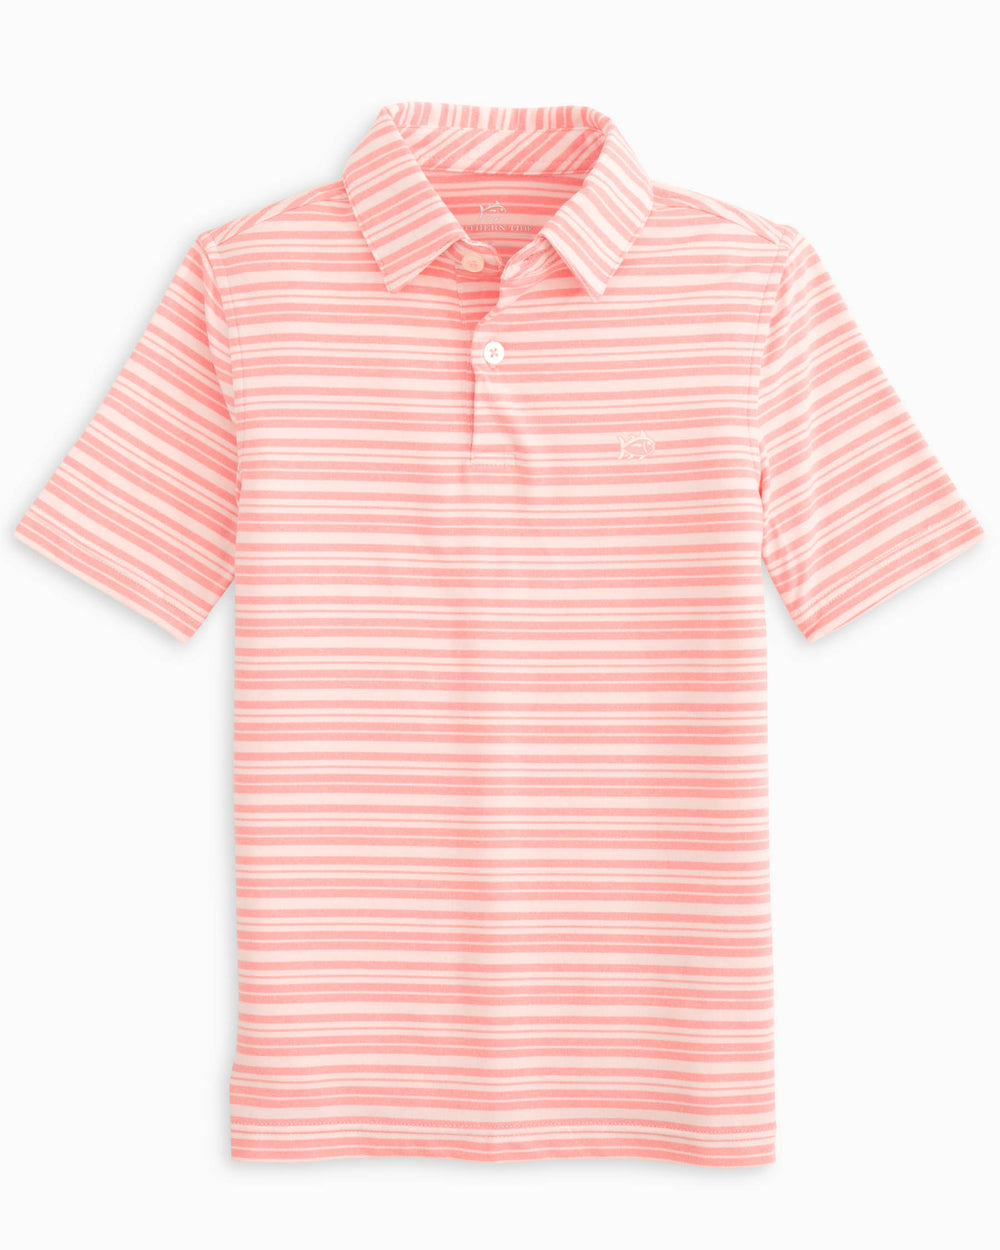 The front view of the Southern Tide Youth Ryder Heather Bombay Stripe Performance Polo Shirt by Southern Tide - Heather Flamingo Pink